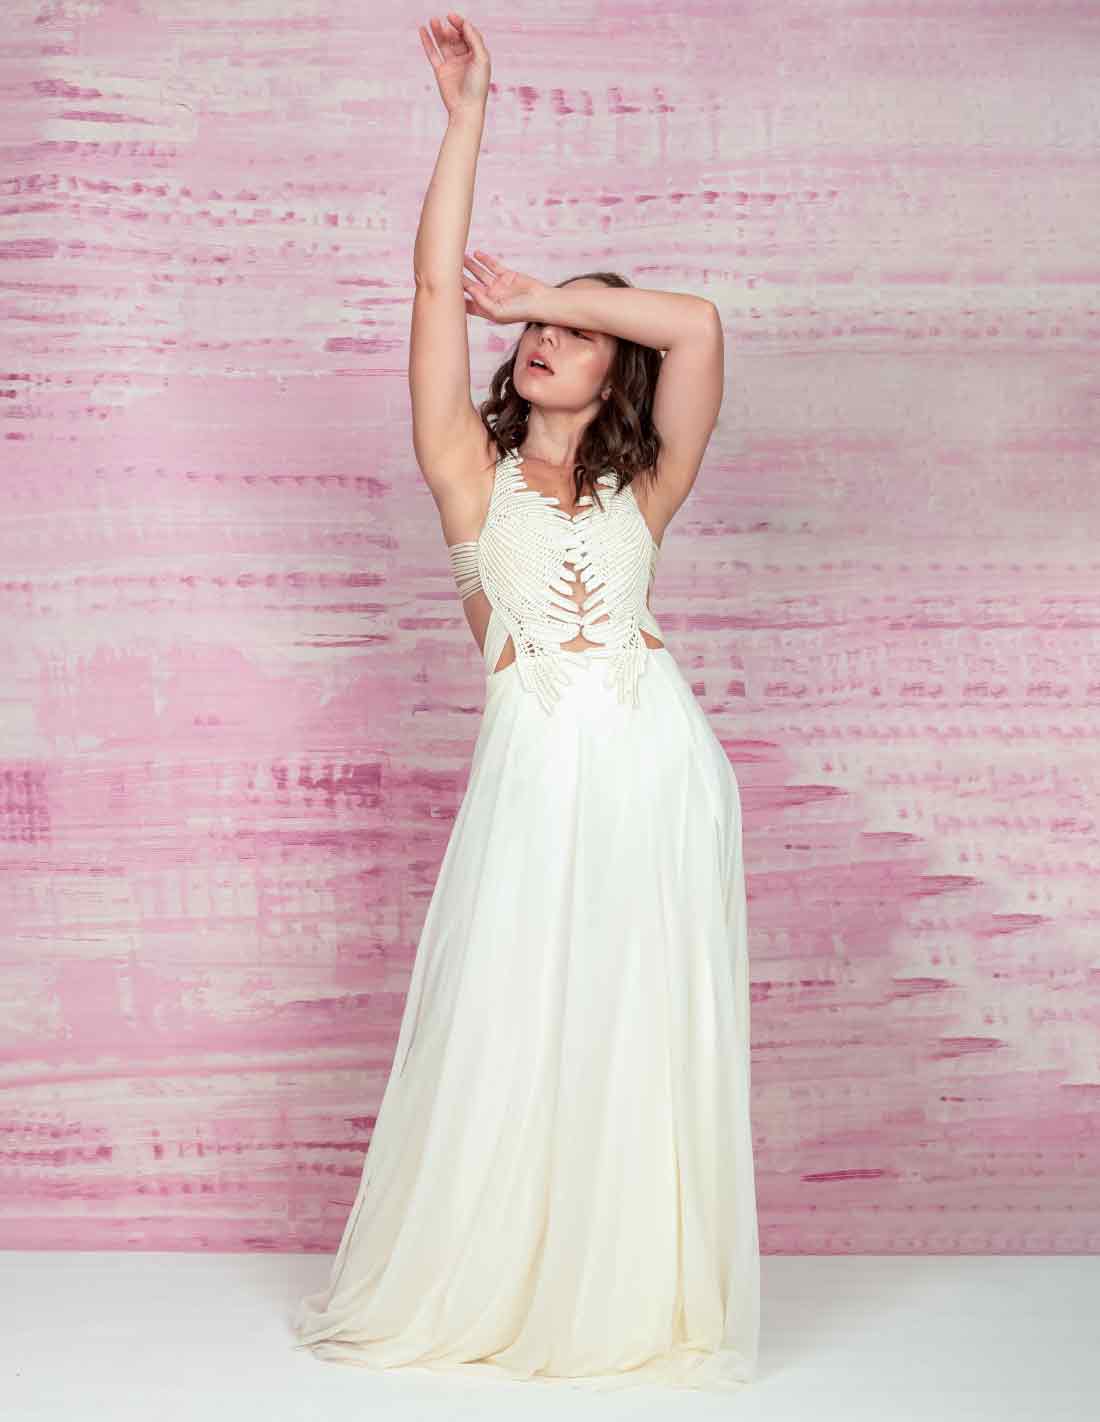 Dream Dress Ivory. Dress With Hand Woven Macramé In Ivory. Entreaguas